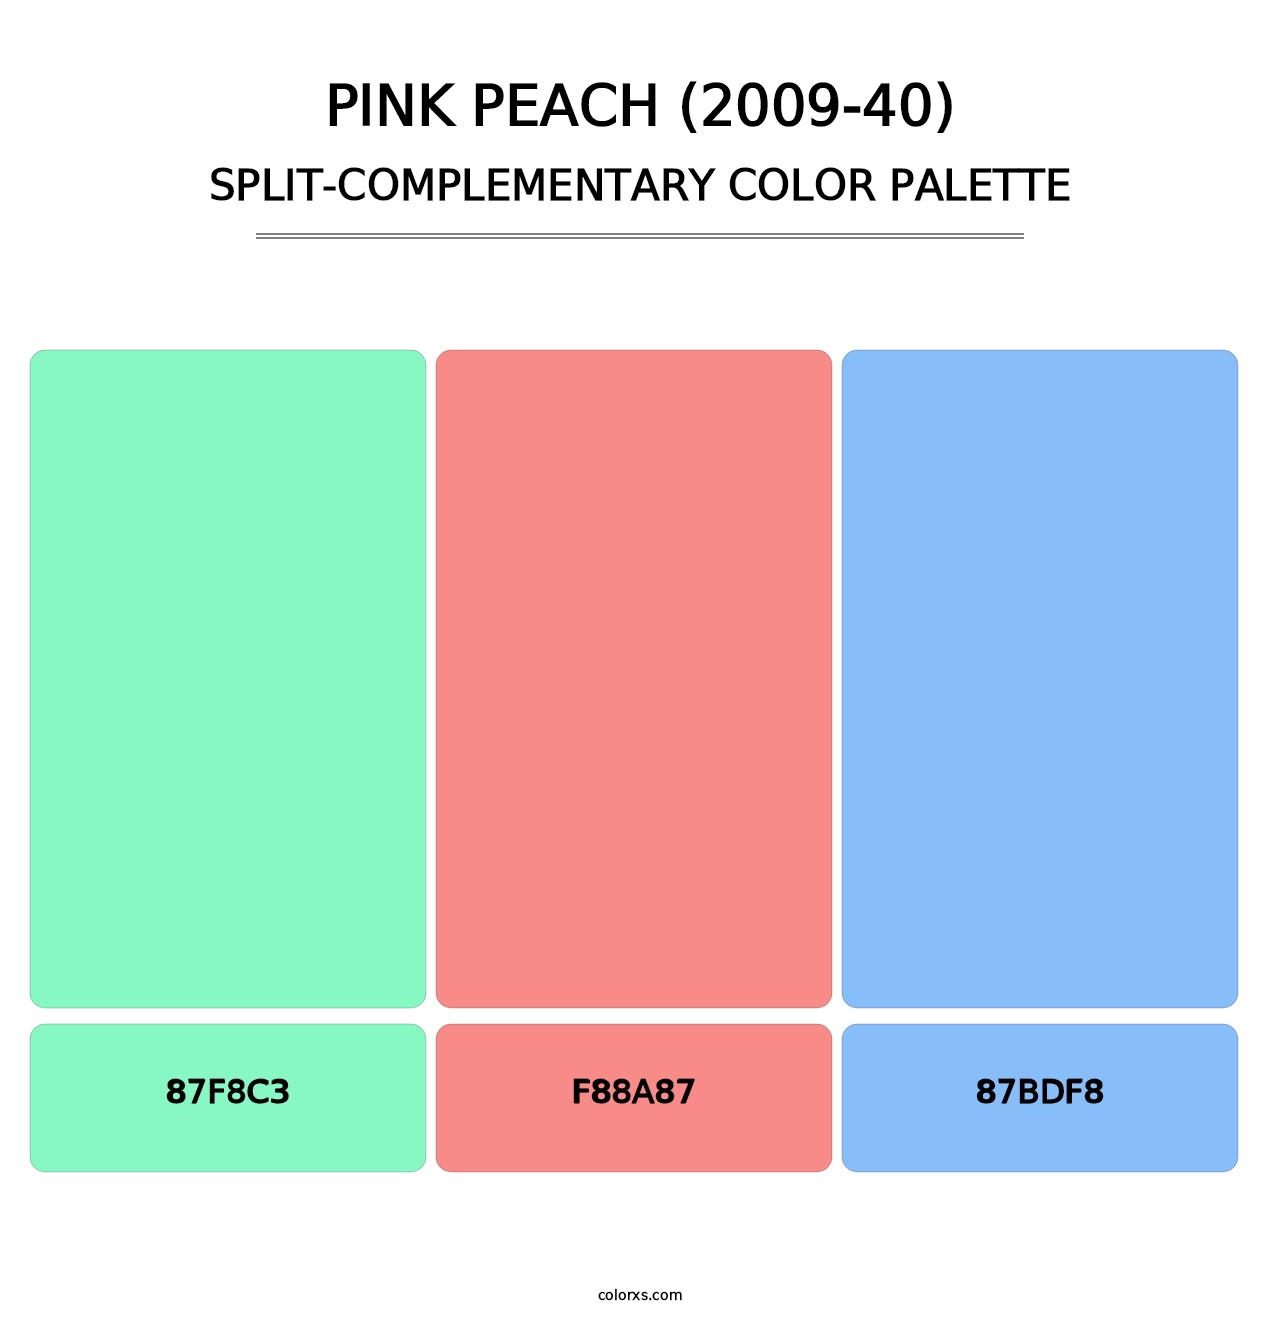 Pink Peach (2009-40) - Split-Complementary Color Palette